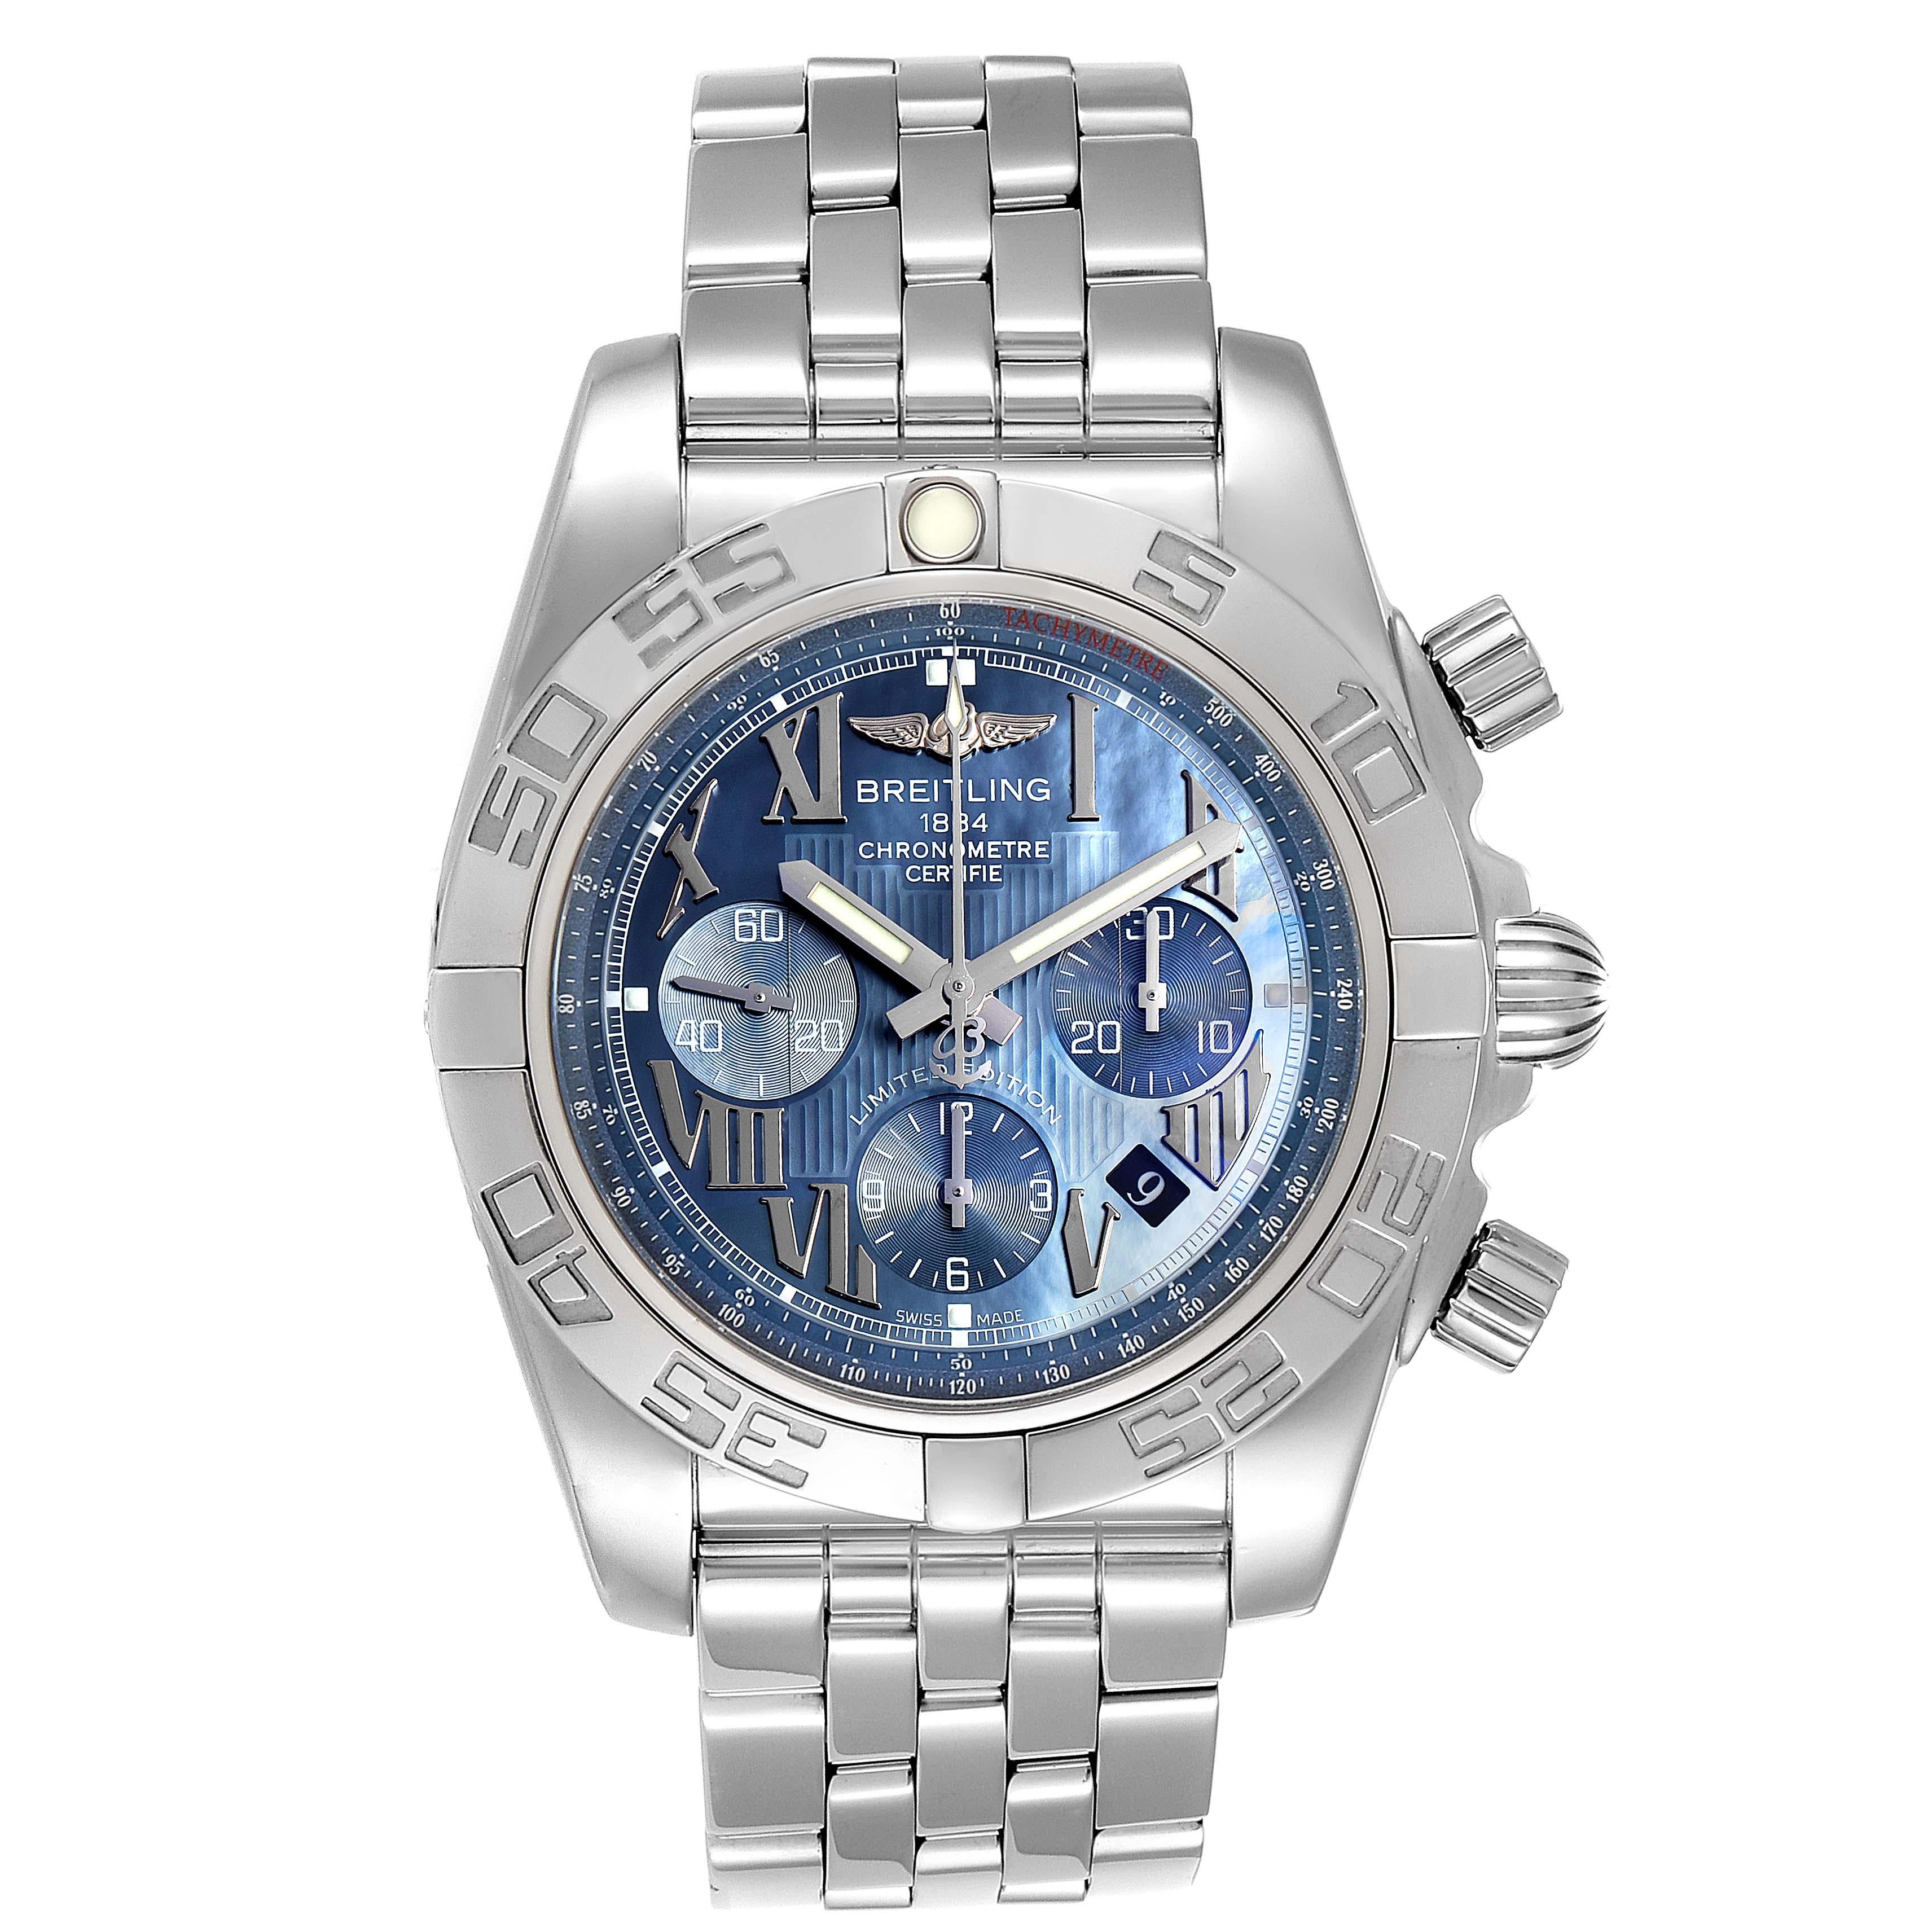 Breitling Chronomat 01 Blue MOP Dial Steel Mens Watch AB0110 Box Papers. Self-winding automatic officially certified chronometer movement. Chronograph function. Stainless steel case 43.5 mm in diameter with screwed down crown and pushers. Stainless